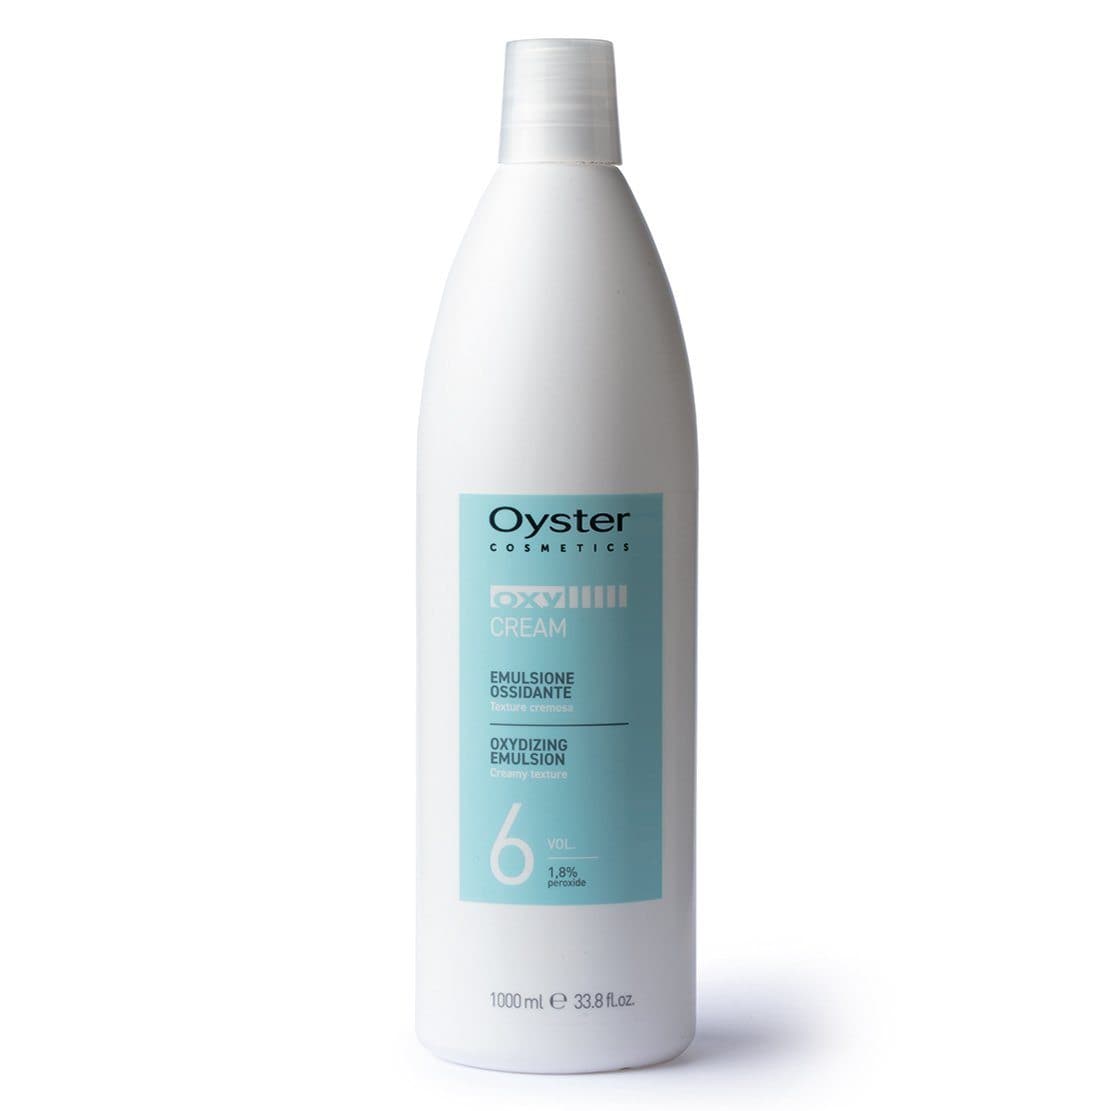 Oyster Oxy Cream Developer | 6 vol - 1.8% Peroxide | OYSTER - SH Salons